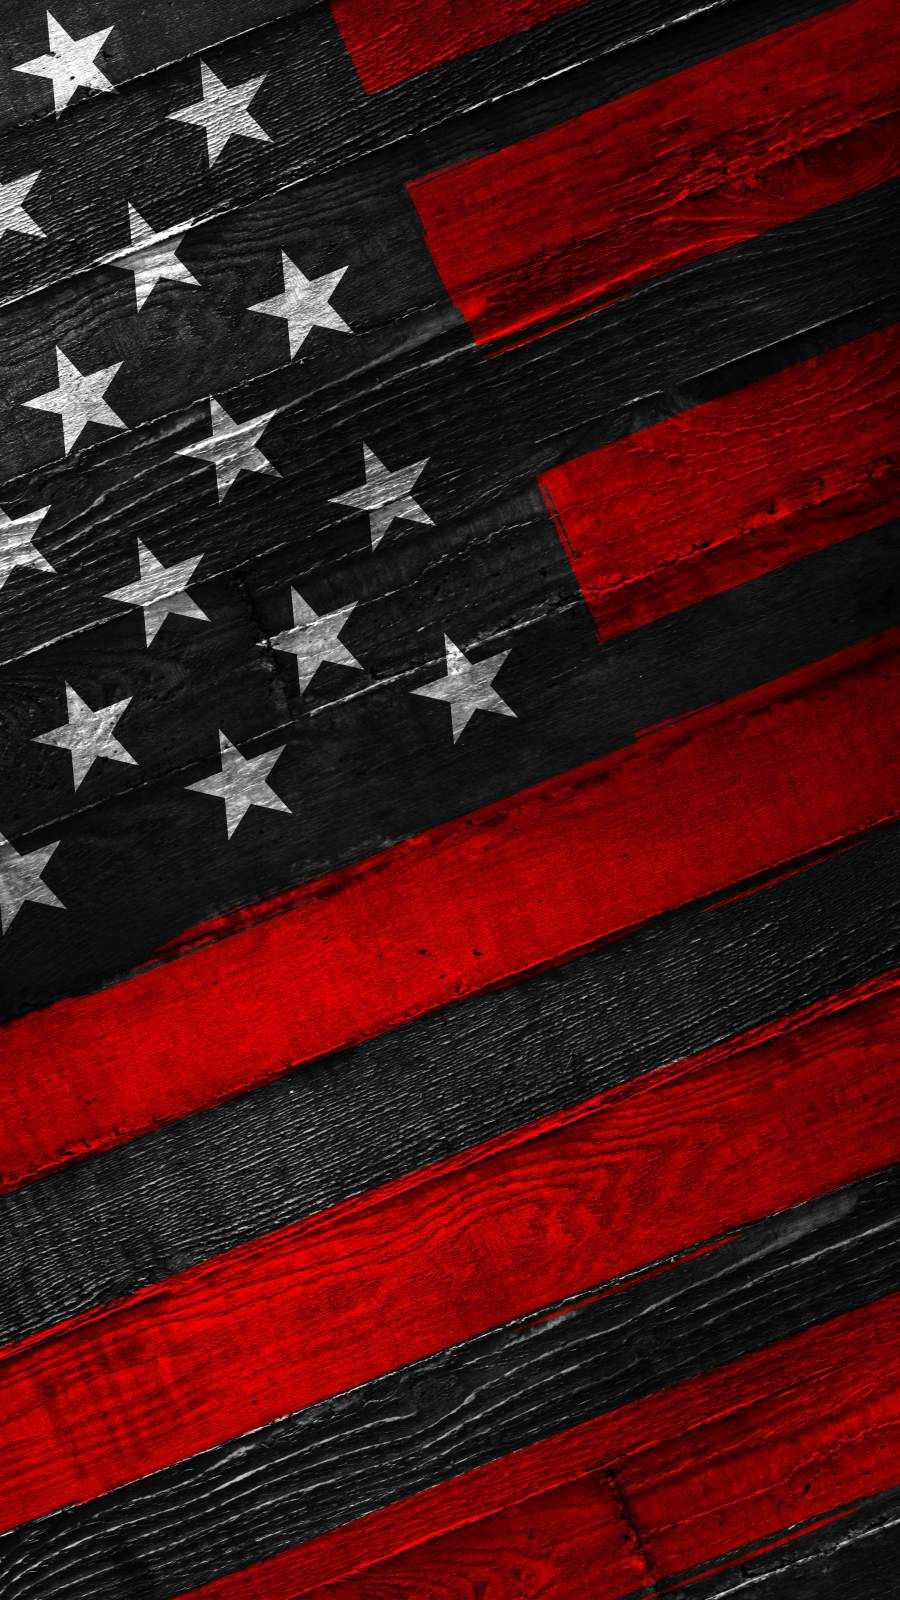 Download US Flag Vertical wallpaper by jsprice  a6  Free on ZEDGE now  Browse mi  American flag wallpaper iphone American flag wallpaper American  flag images